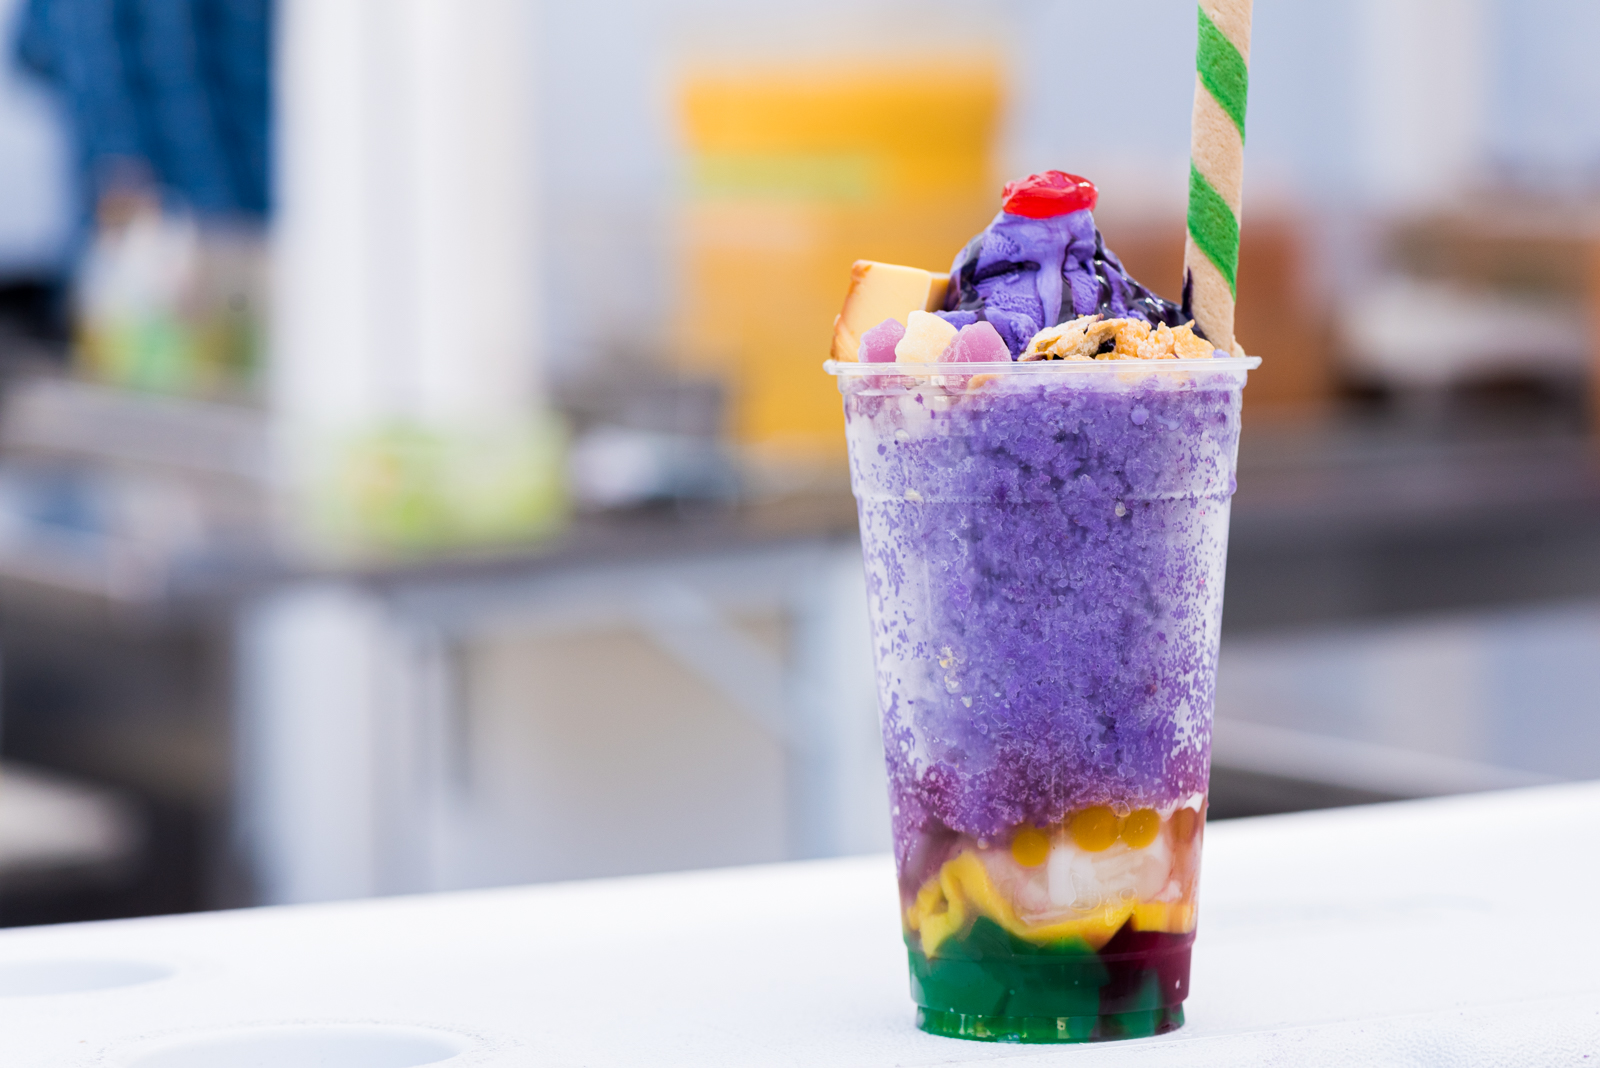 A cup of halo halo, with layers of bright purple ube ice cream, flan and sweet beans.